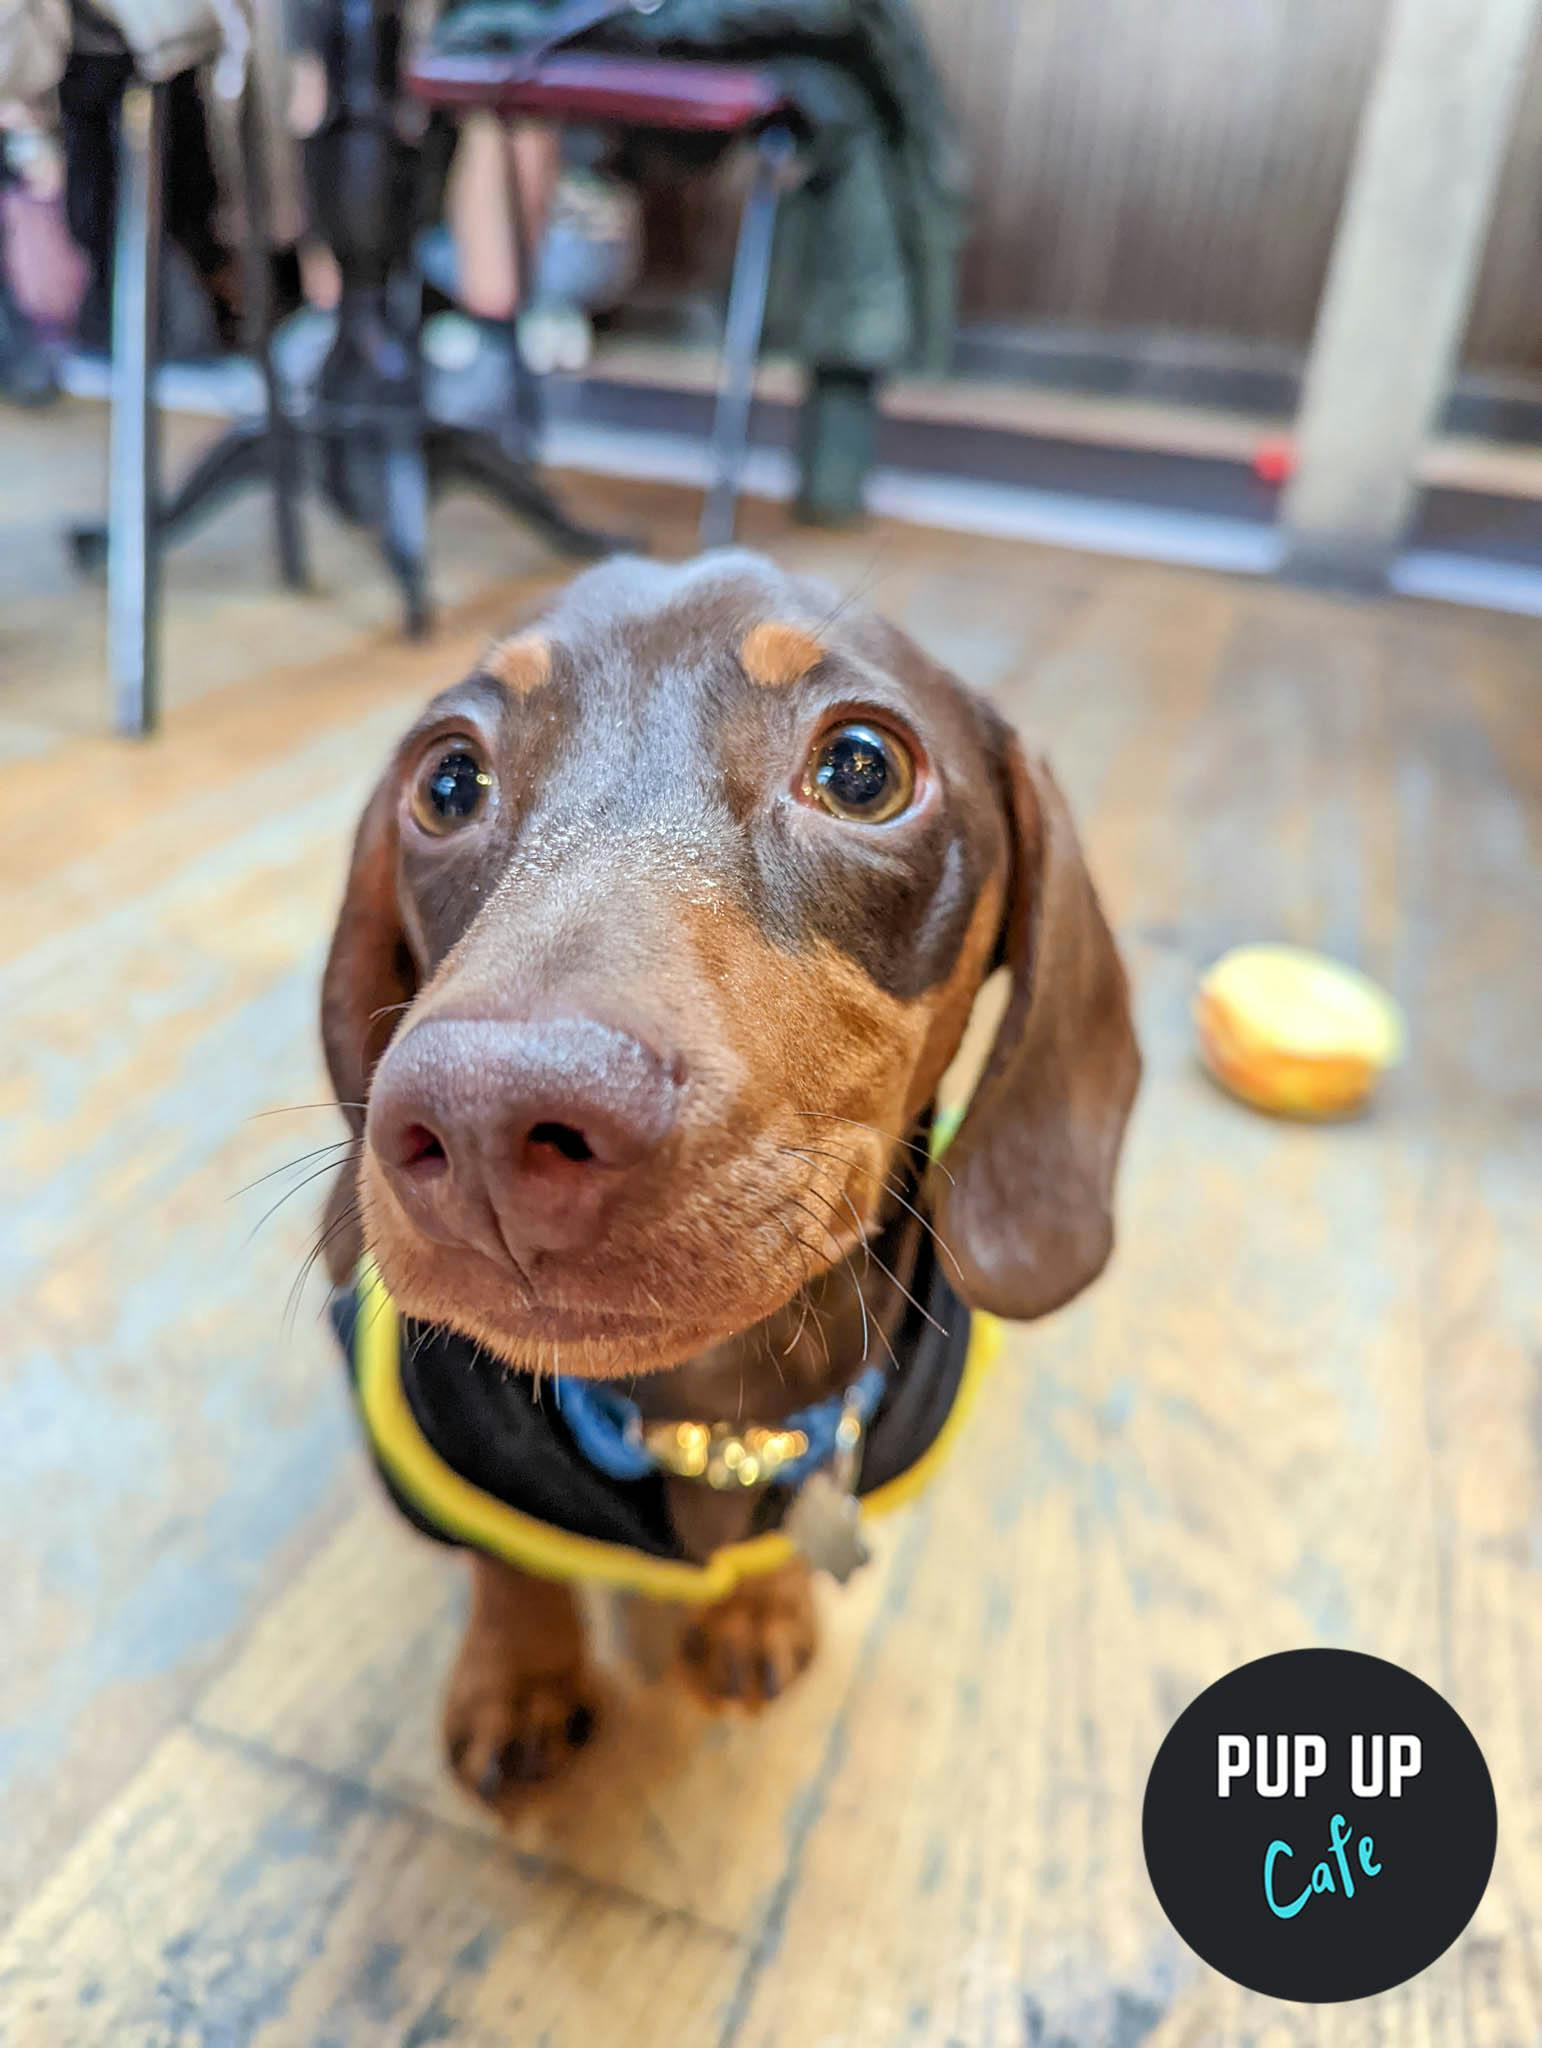 Dachshund Pup Up Cafe Comes To Leeds Electric Press!